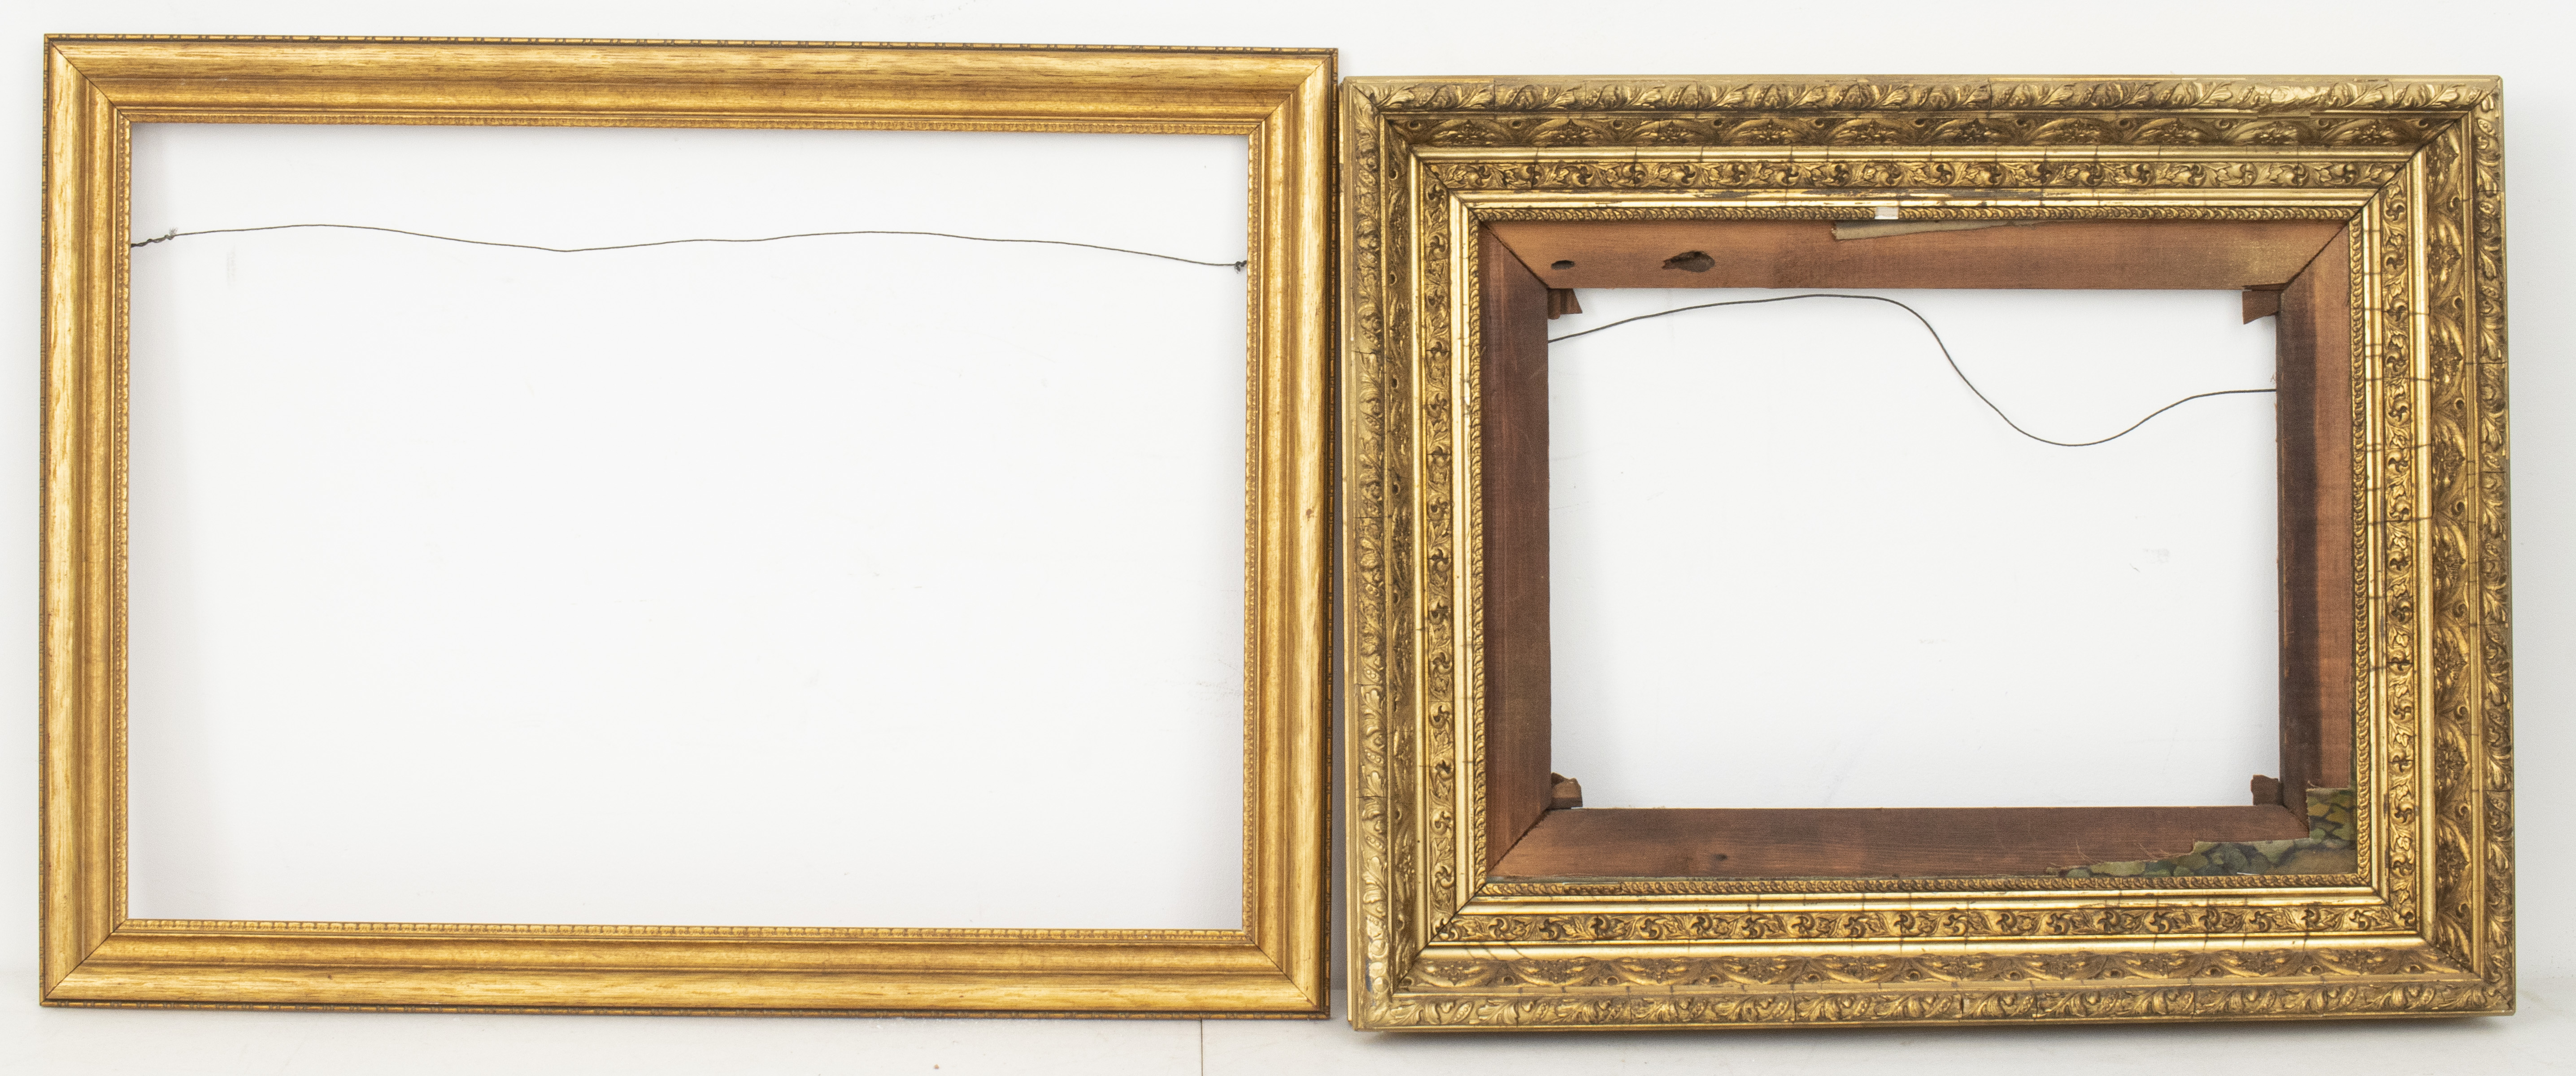 GILTWOOD CARVED PAINTING FRAMES  3c4d54